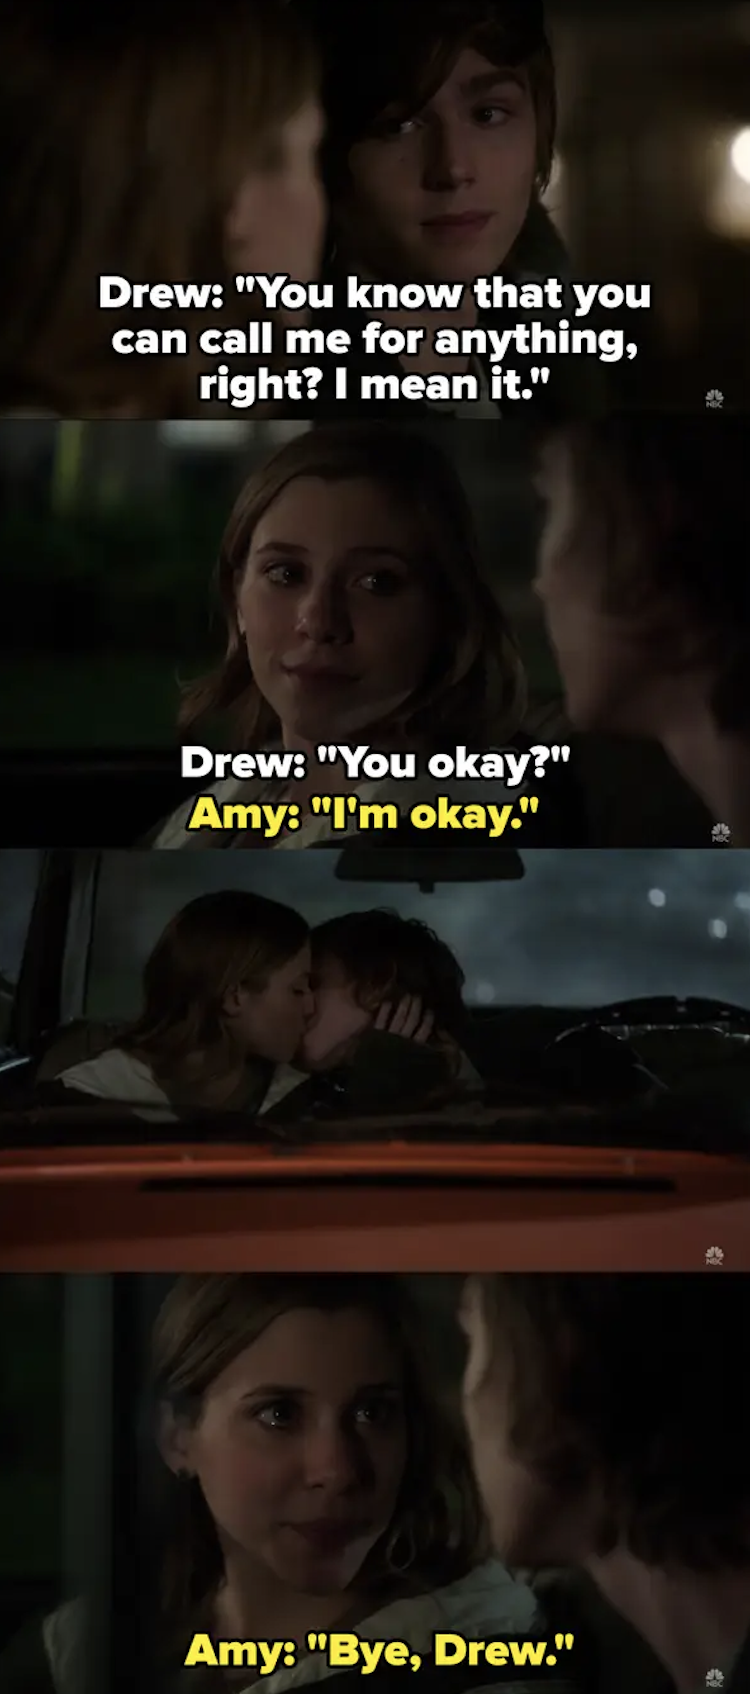 Drew: &quot;you know that you can call me for anything, right? I mean that. You ok?&quot; Amy: I&quot;m ok. then they kiss in the car and Amy says, &quot;Bye, Drew&quot;